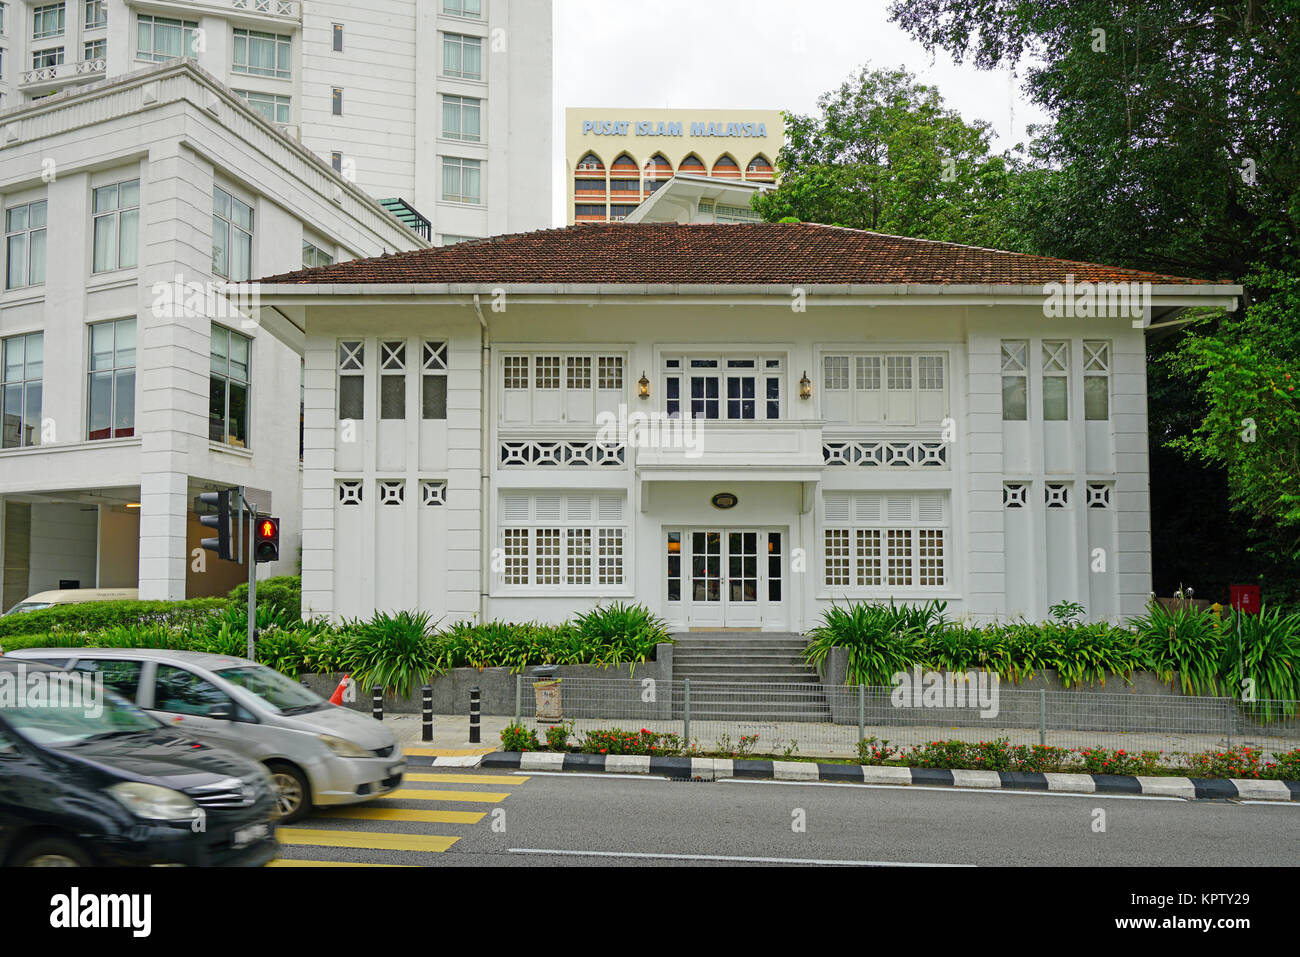 View of the Majestic Hotel, a landmark national heritage colonial hotel in Kuala Lumpur, Malaysia Stock Photo